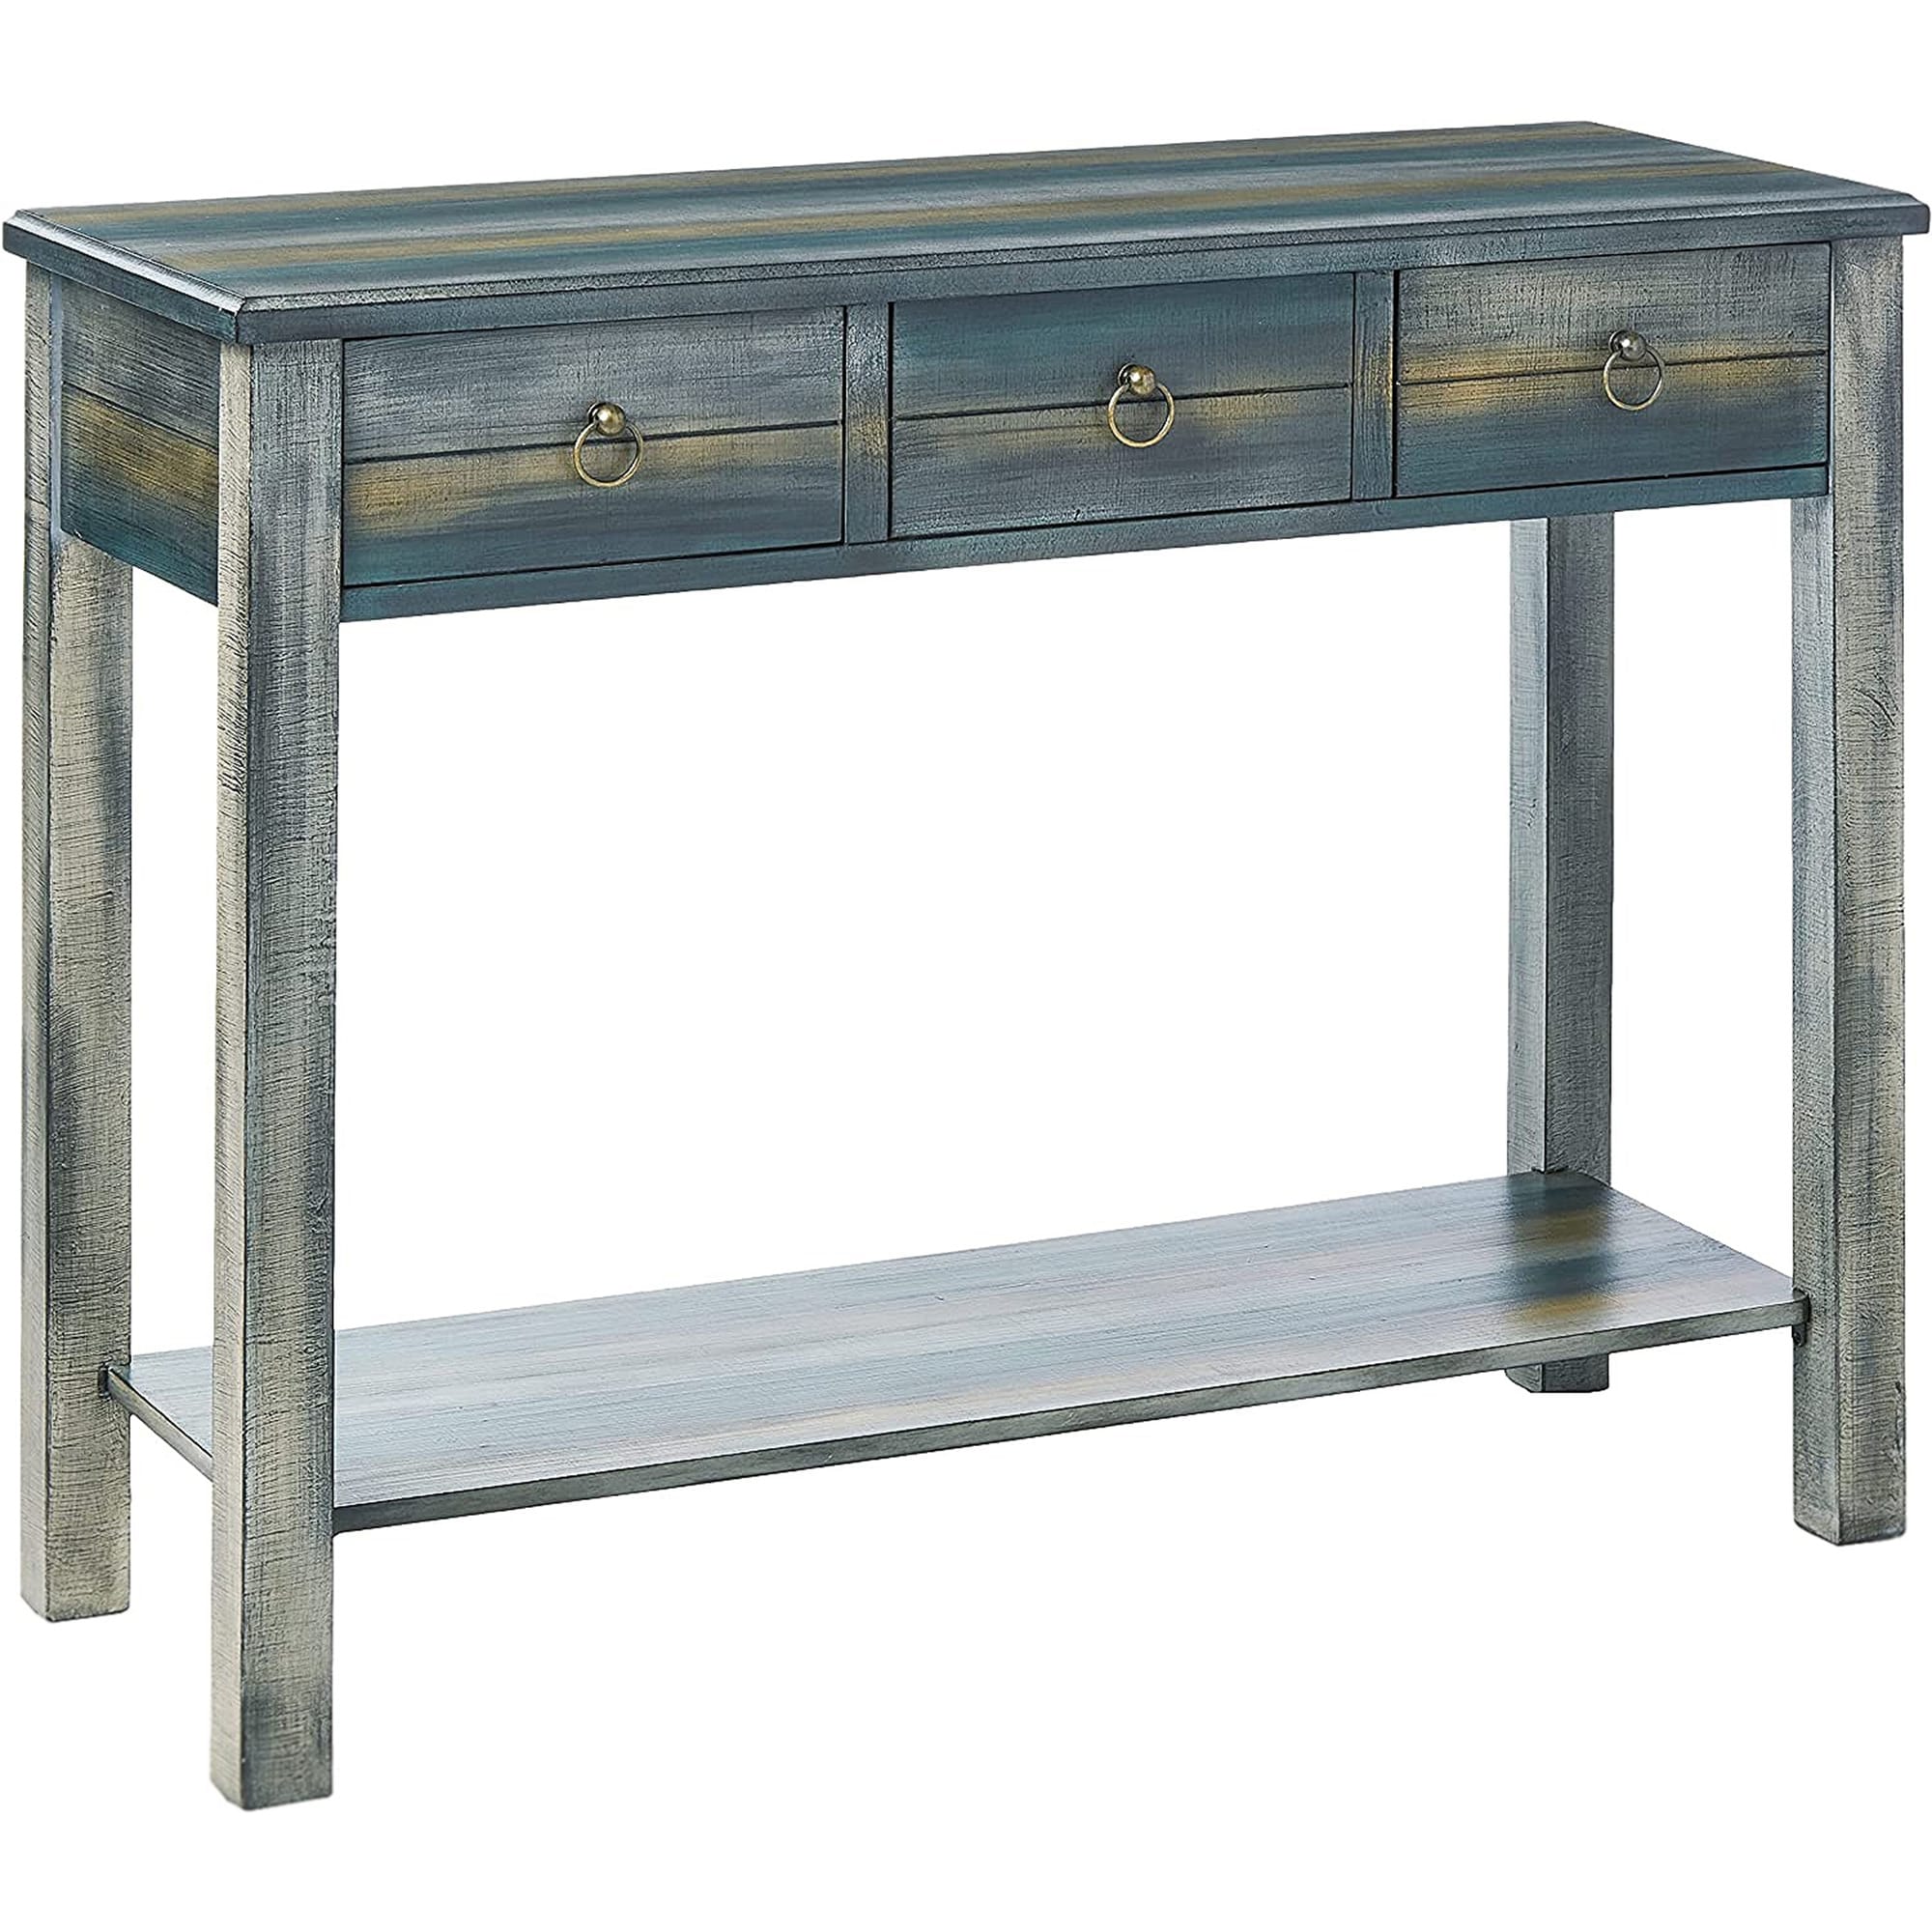 Glancio Console Table in Antique White and Teal